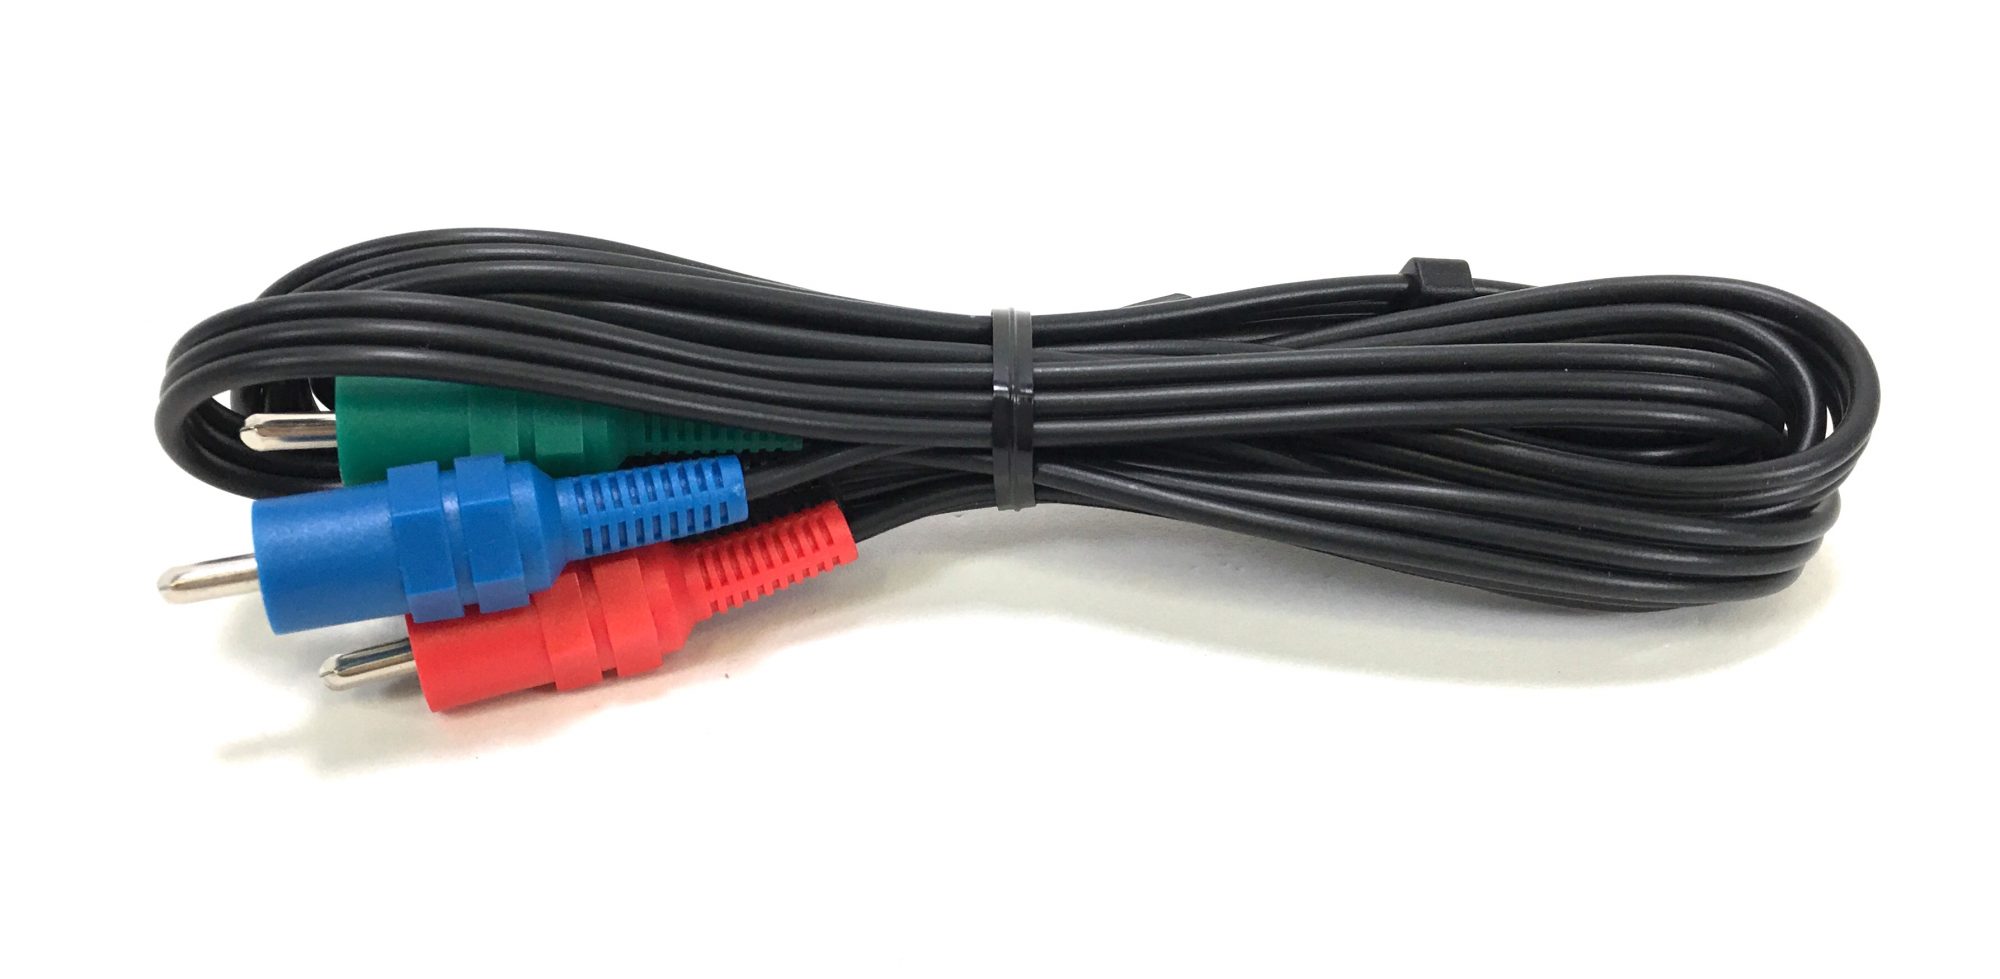 Genuine Sony Component Video Audio Cable for HDR  Camcorders OEM for SONY FX7 